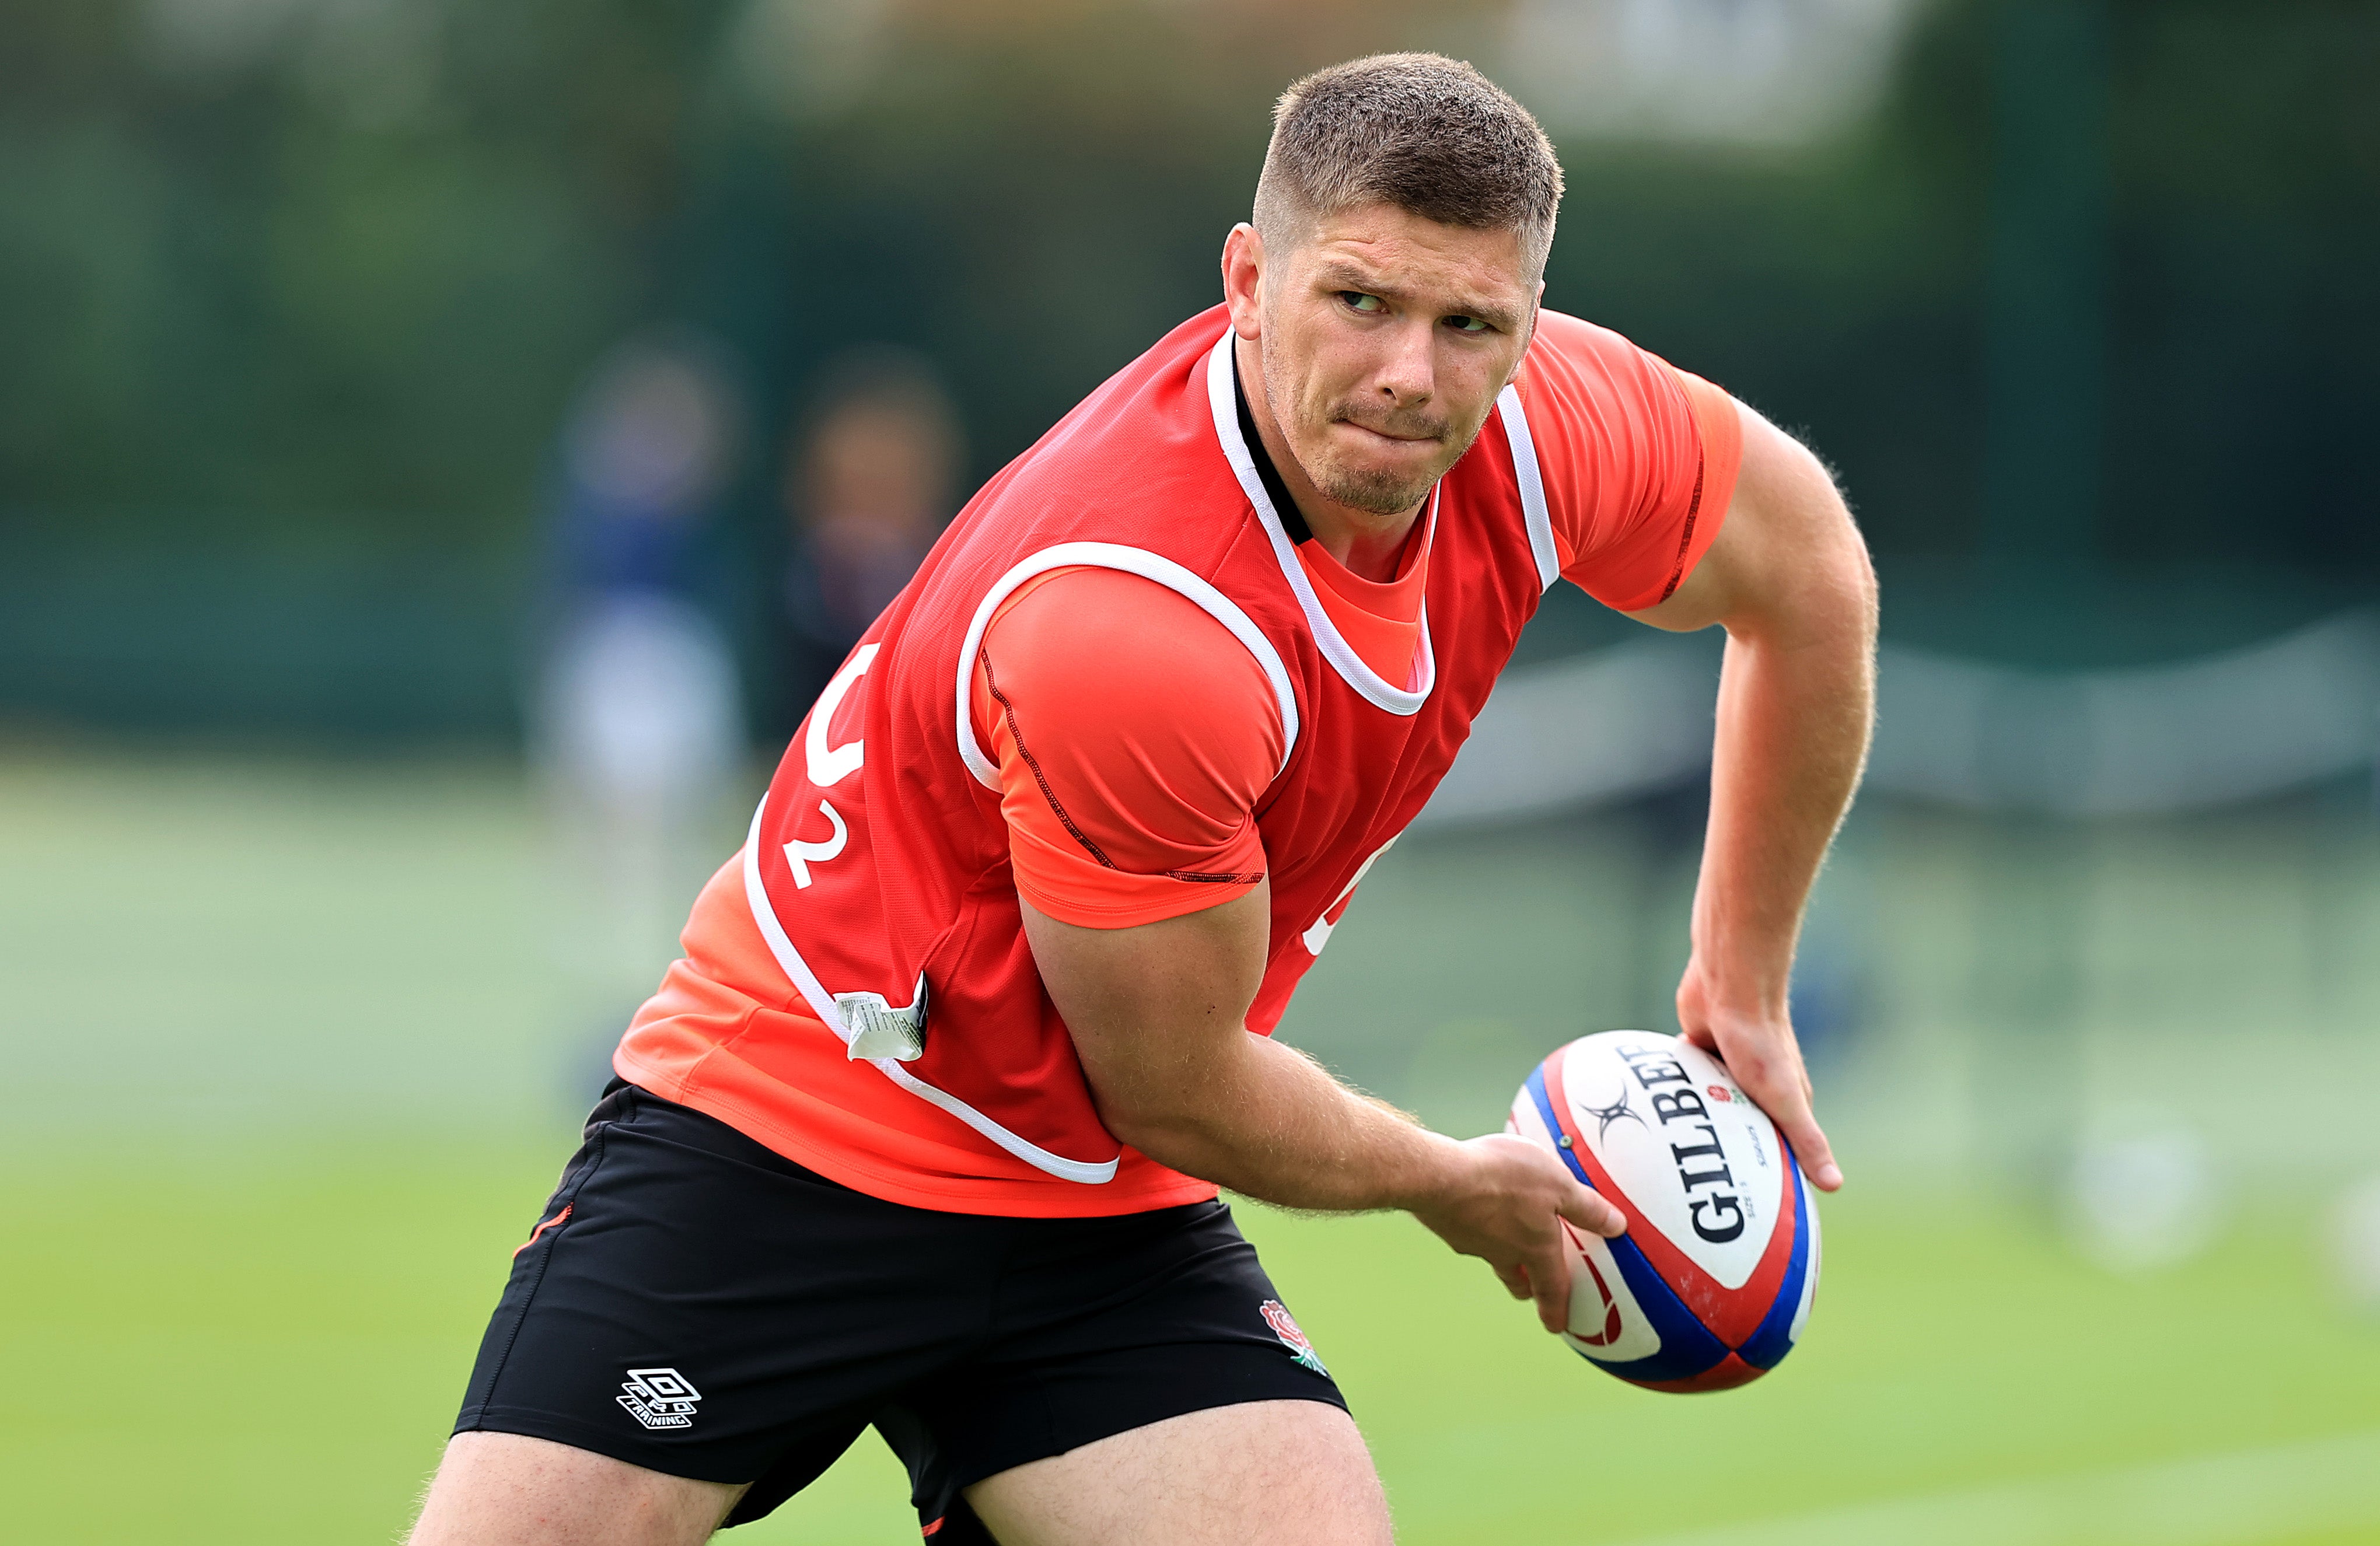 Owen Farrell will lead England for the Six Nations